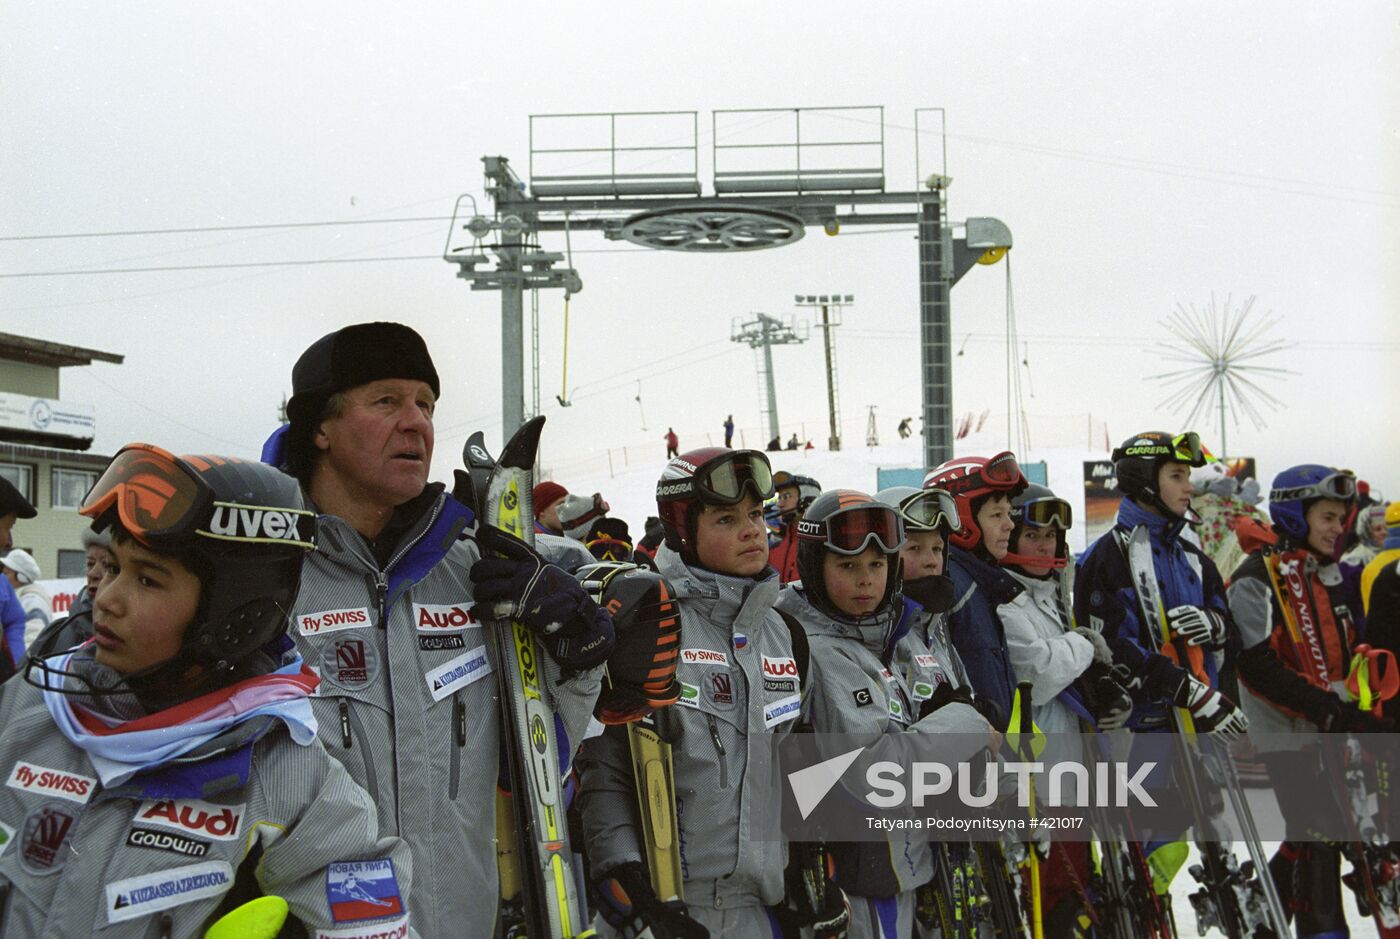 President's Cup alpine skiing competitions